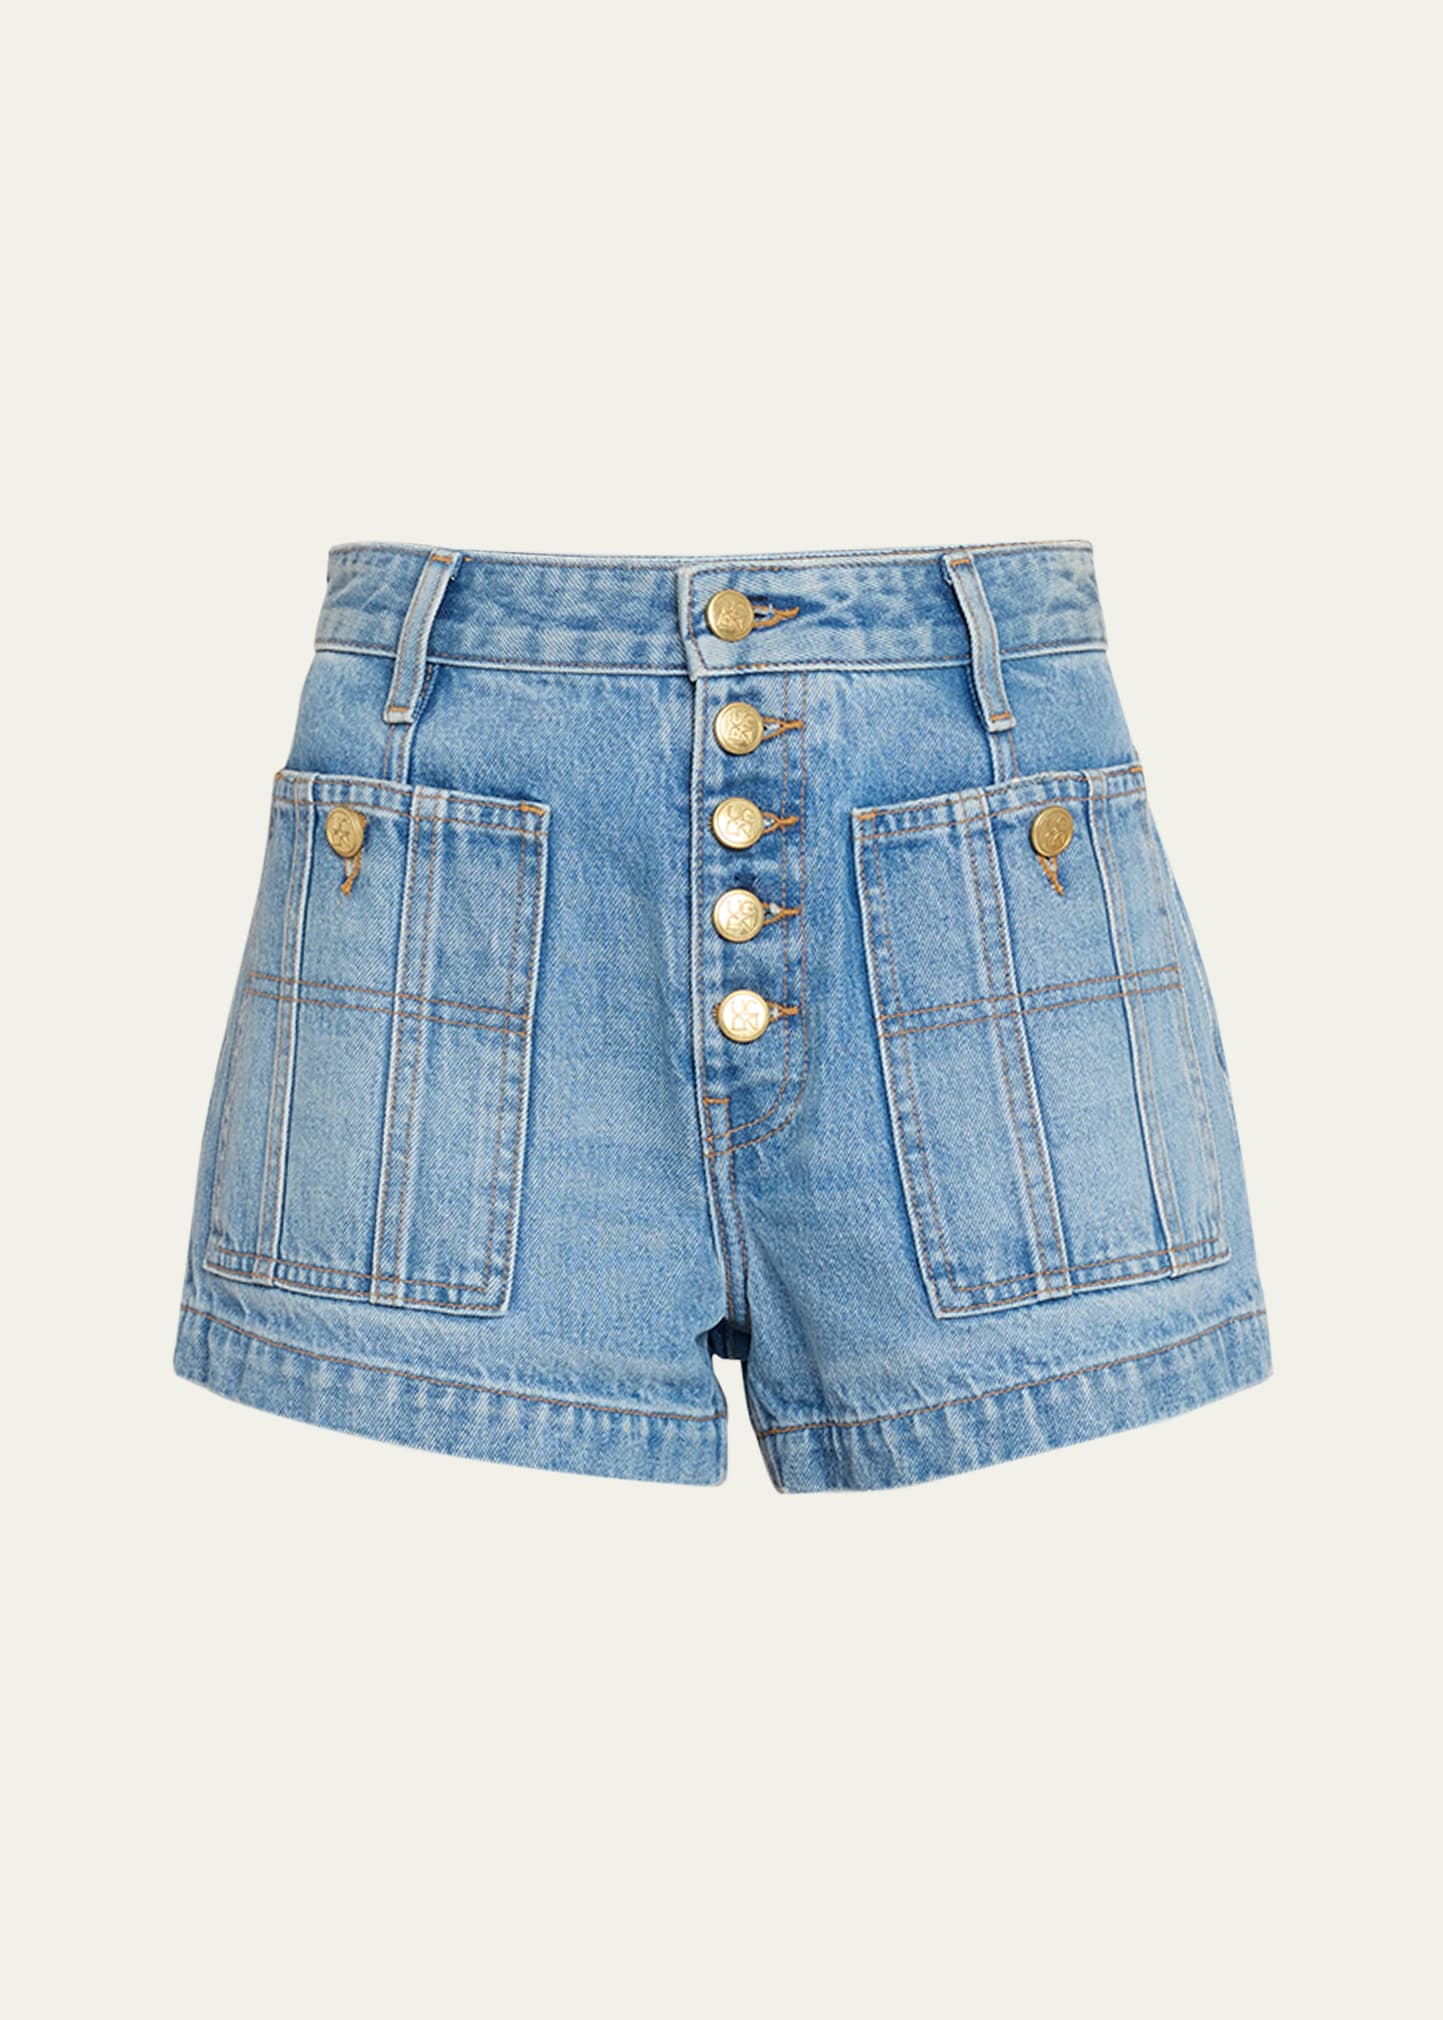 The Ines Exposed Fly Denim Shorts